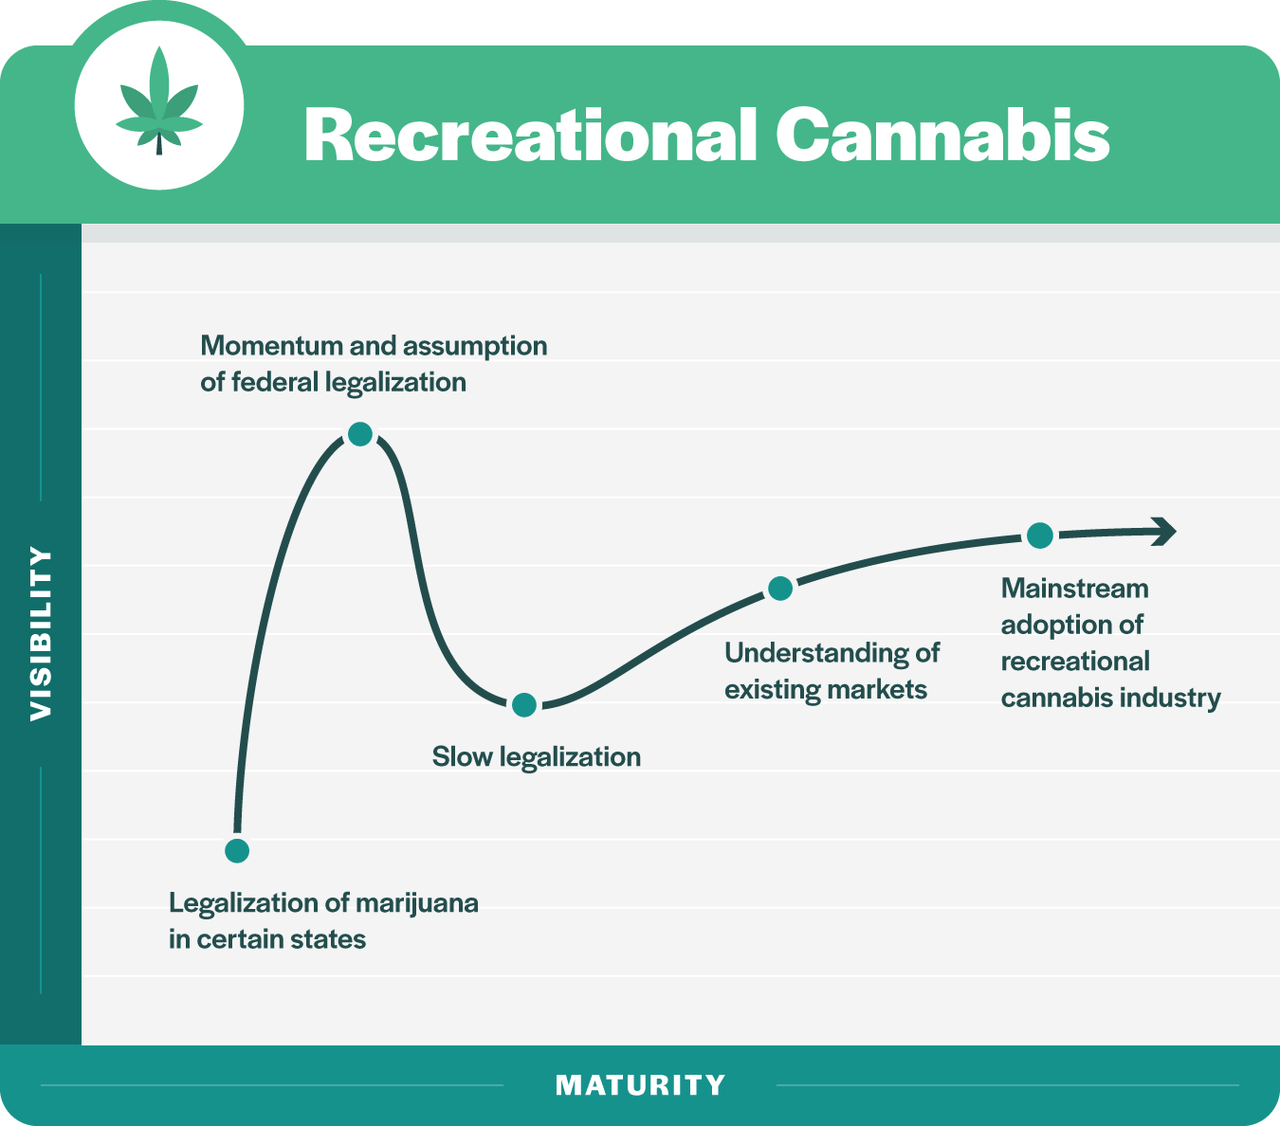 Recreational Cannabis - Trough Of Disillusionment